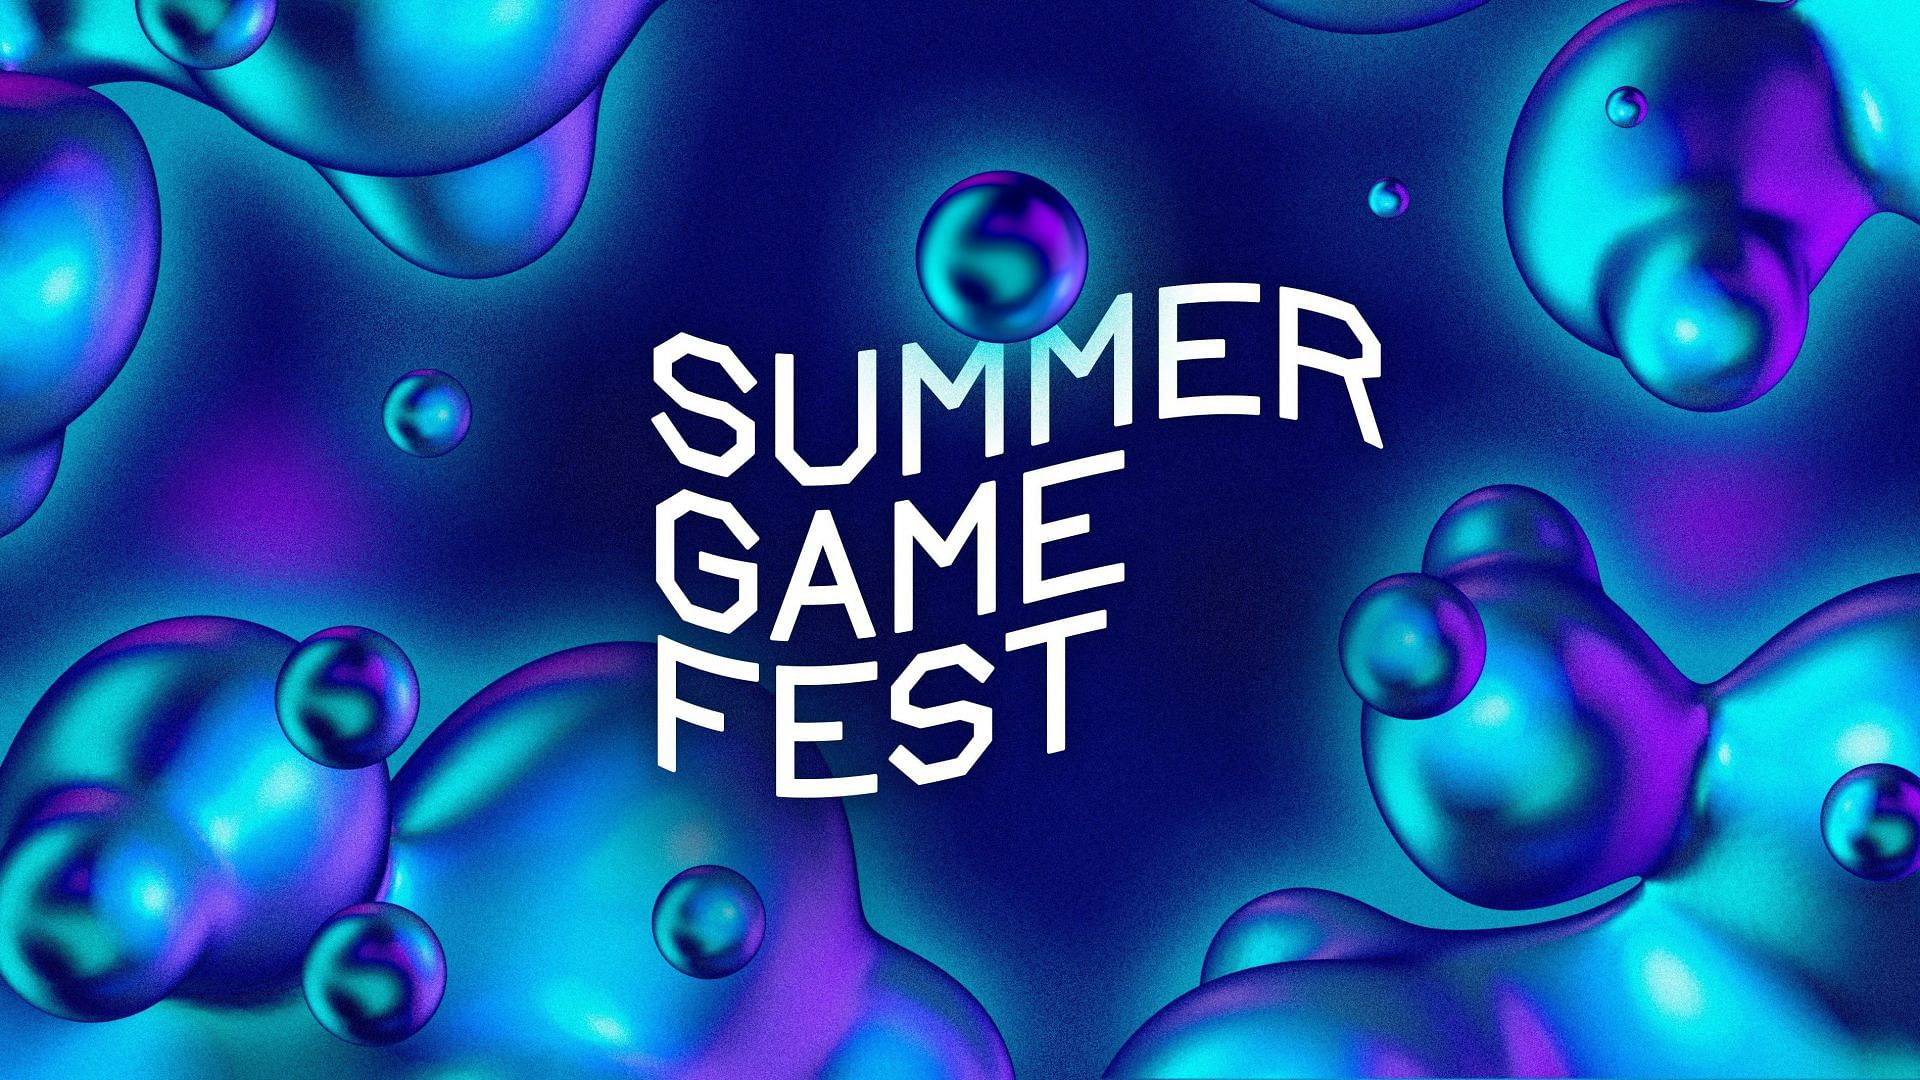 After a phenomenal show last year, Summer Game Fest is back for 2022 (Image by Summer Game Fest)